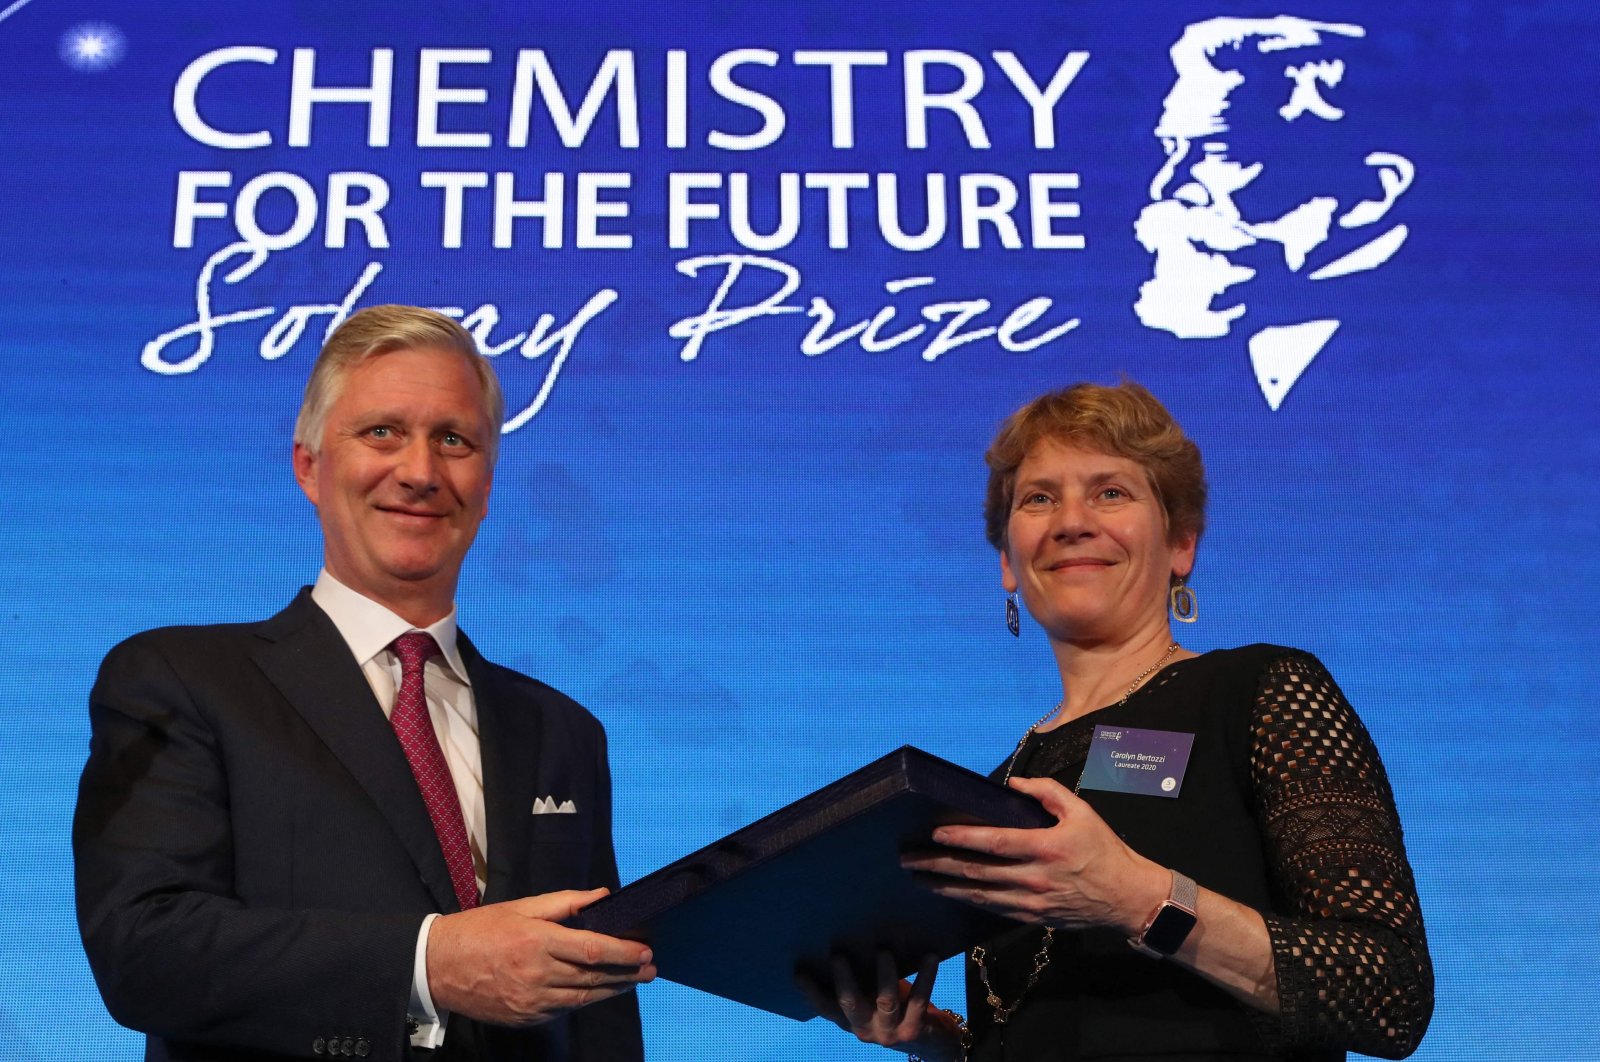 U.S. chemist Carolyn Bertozzi (R) receives an award from King Philippe of Belgium at the Royal Palace in Brussels, Belgium, March 10, 2020. (AFP Photo)